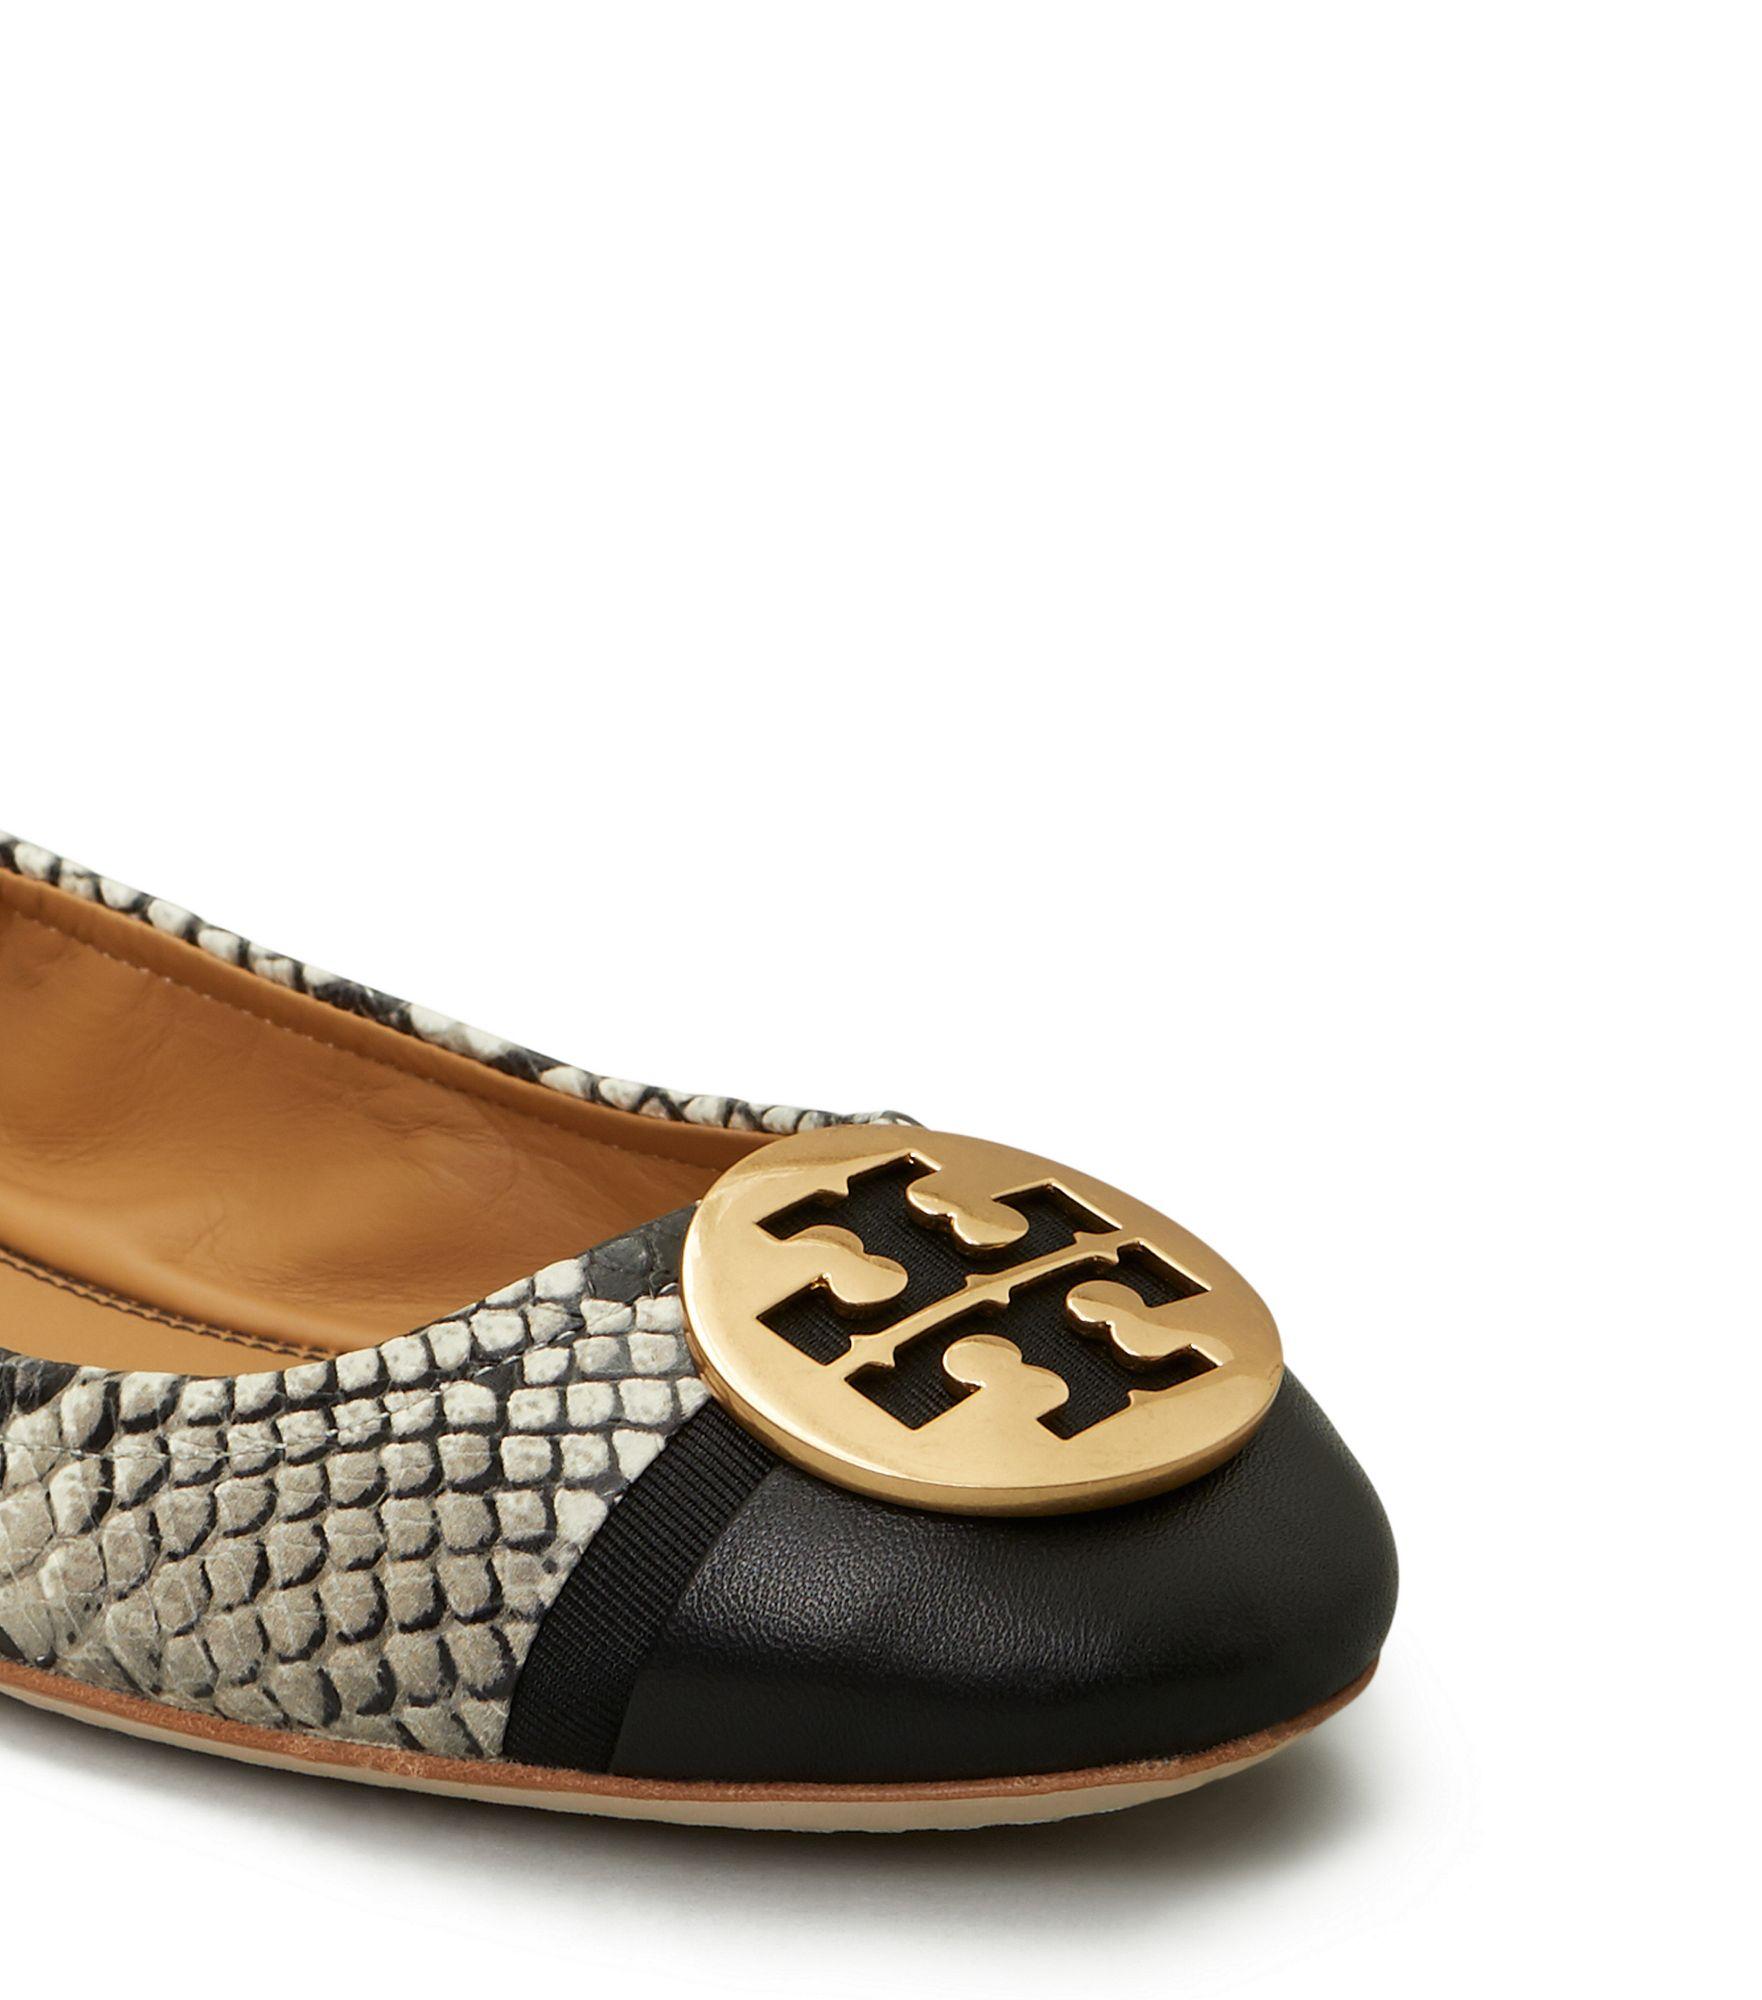 Tory Burch Minnie Cap-toe Ballet Flats, Embossed Leather in Black - Lyst